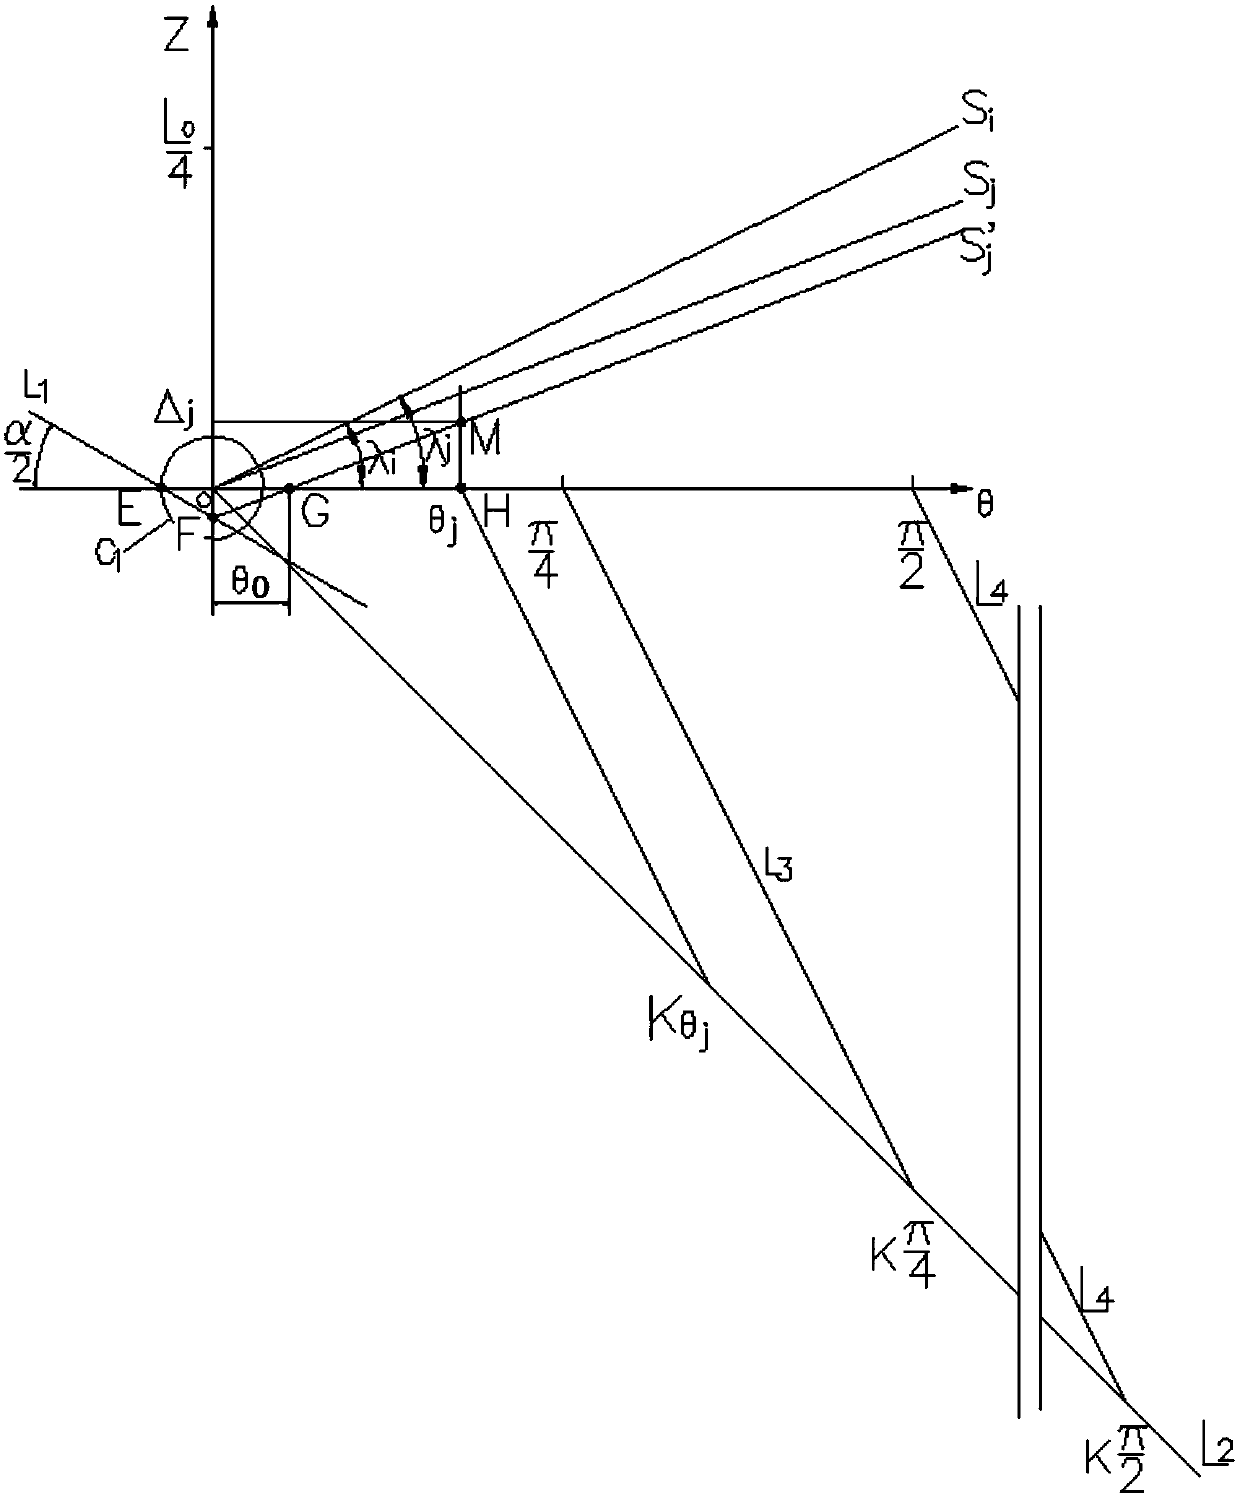 A Calculation Method for Solving the Shading Amount of Axial Sectional Profile in Vertical Projection